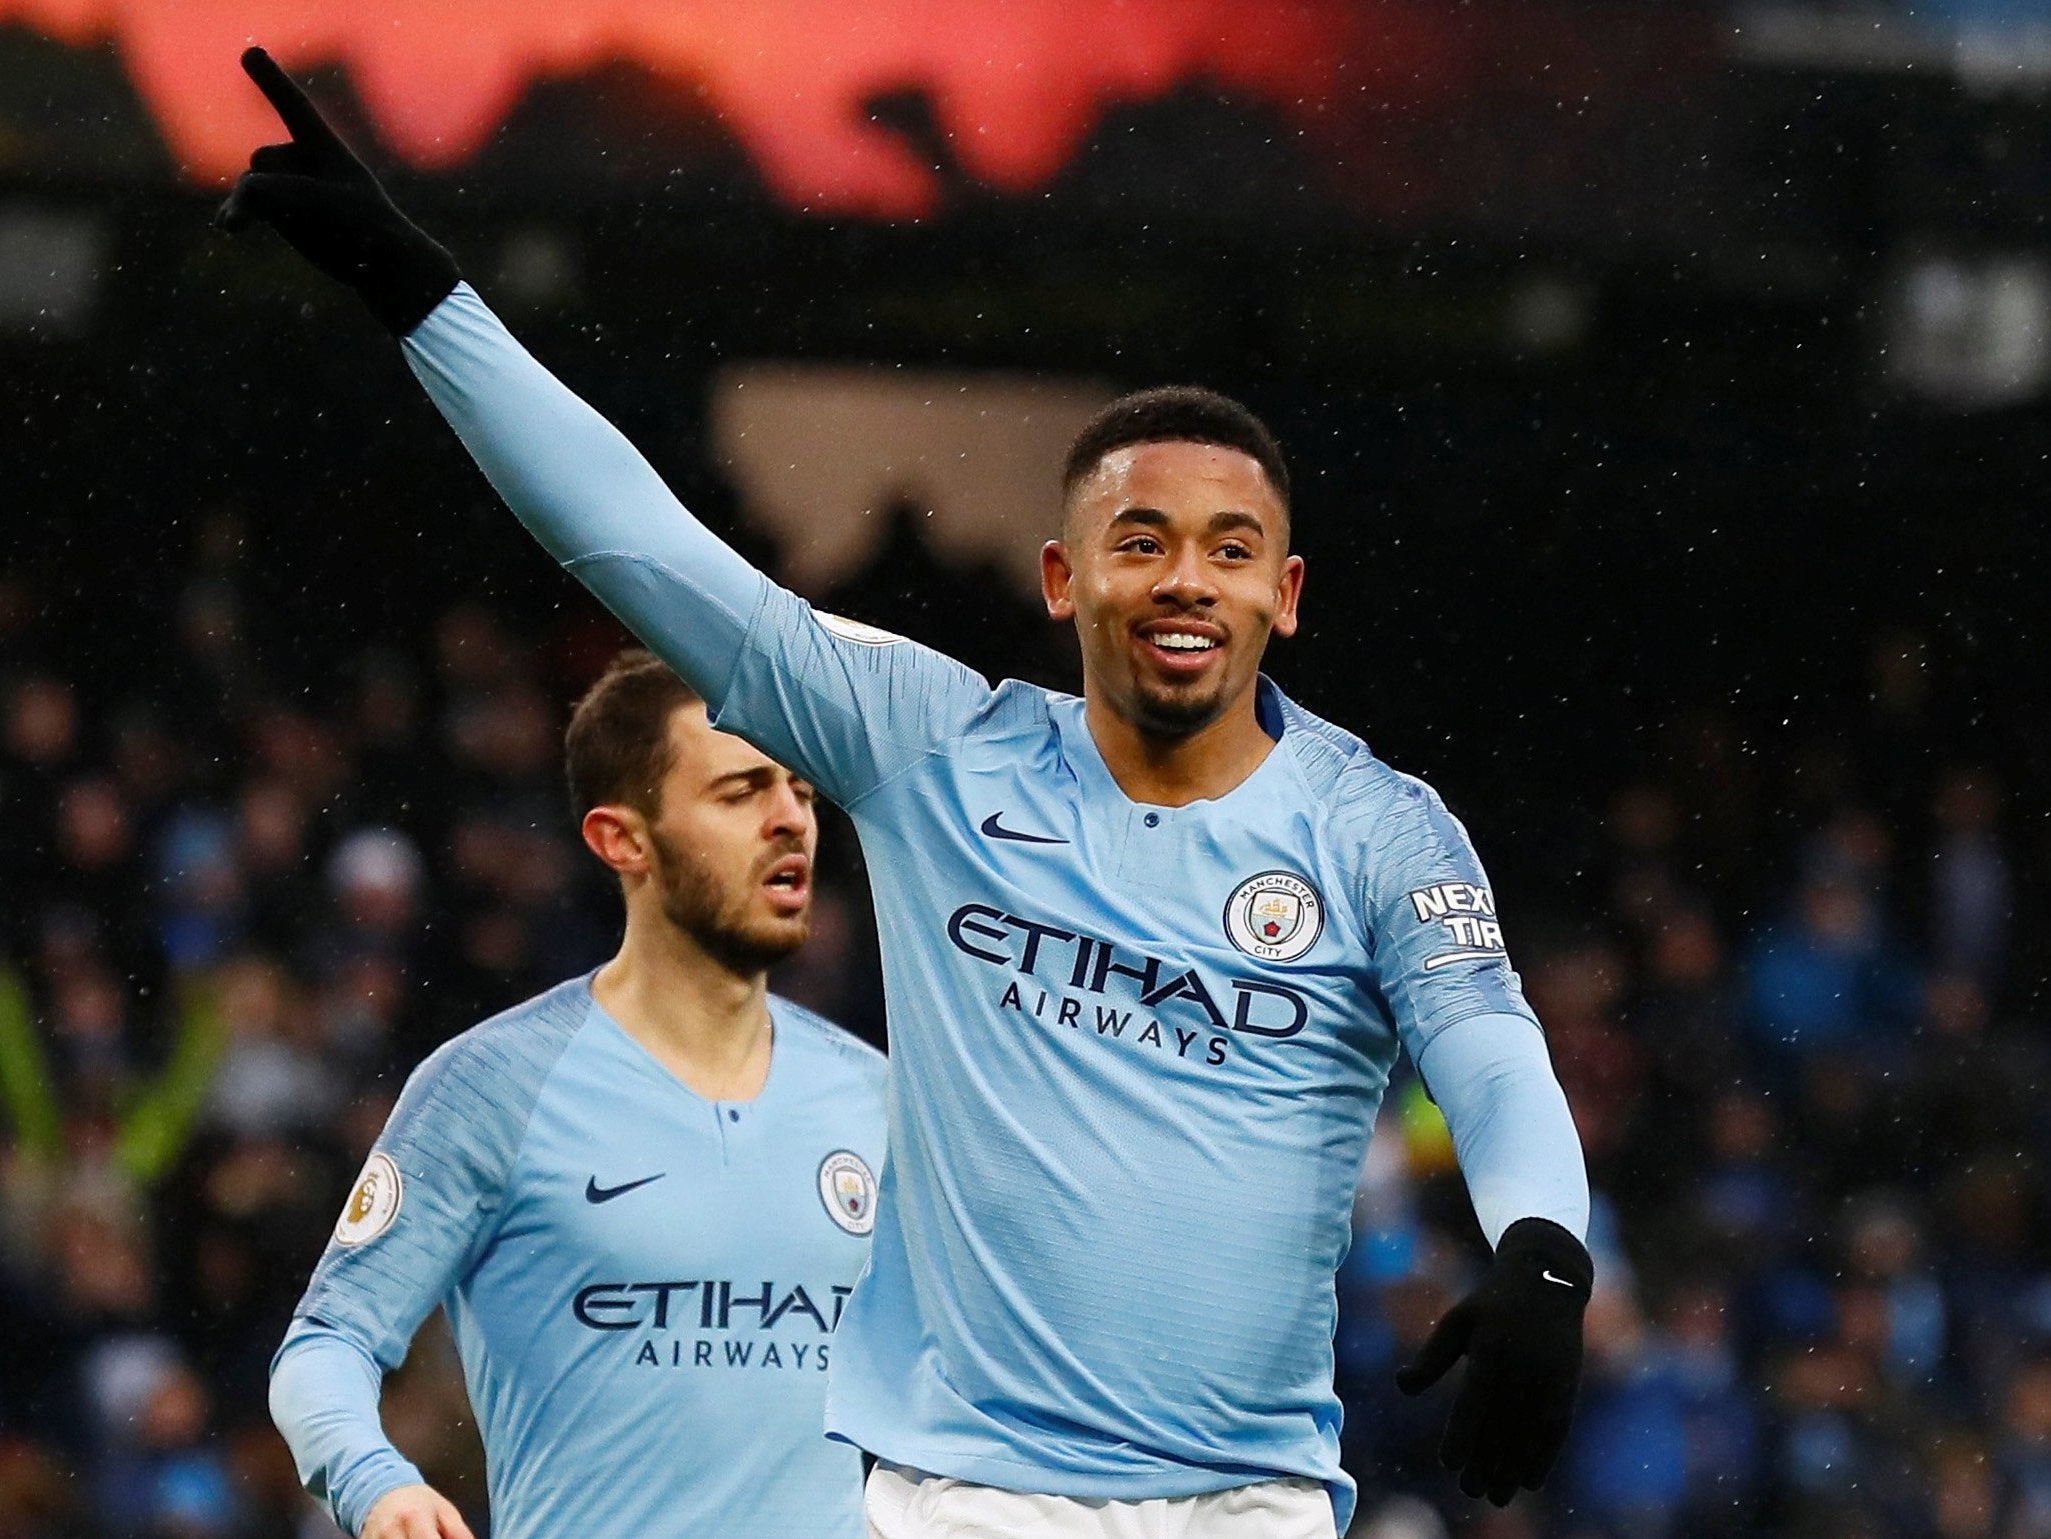 City weathered an early Everton storm to take the lead